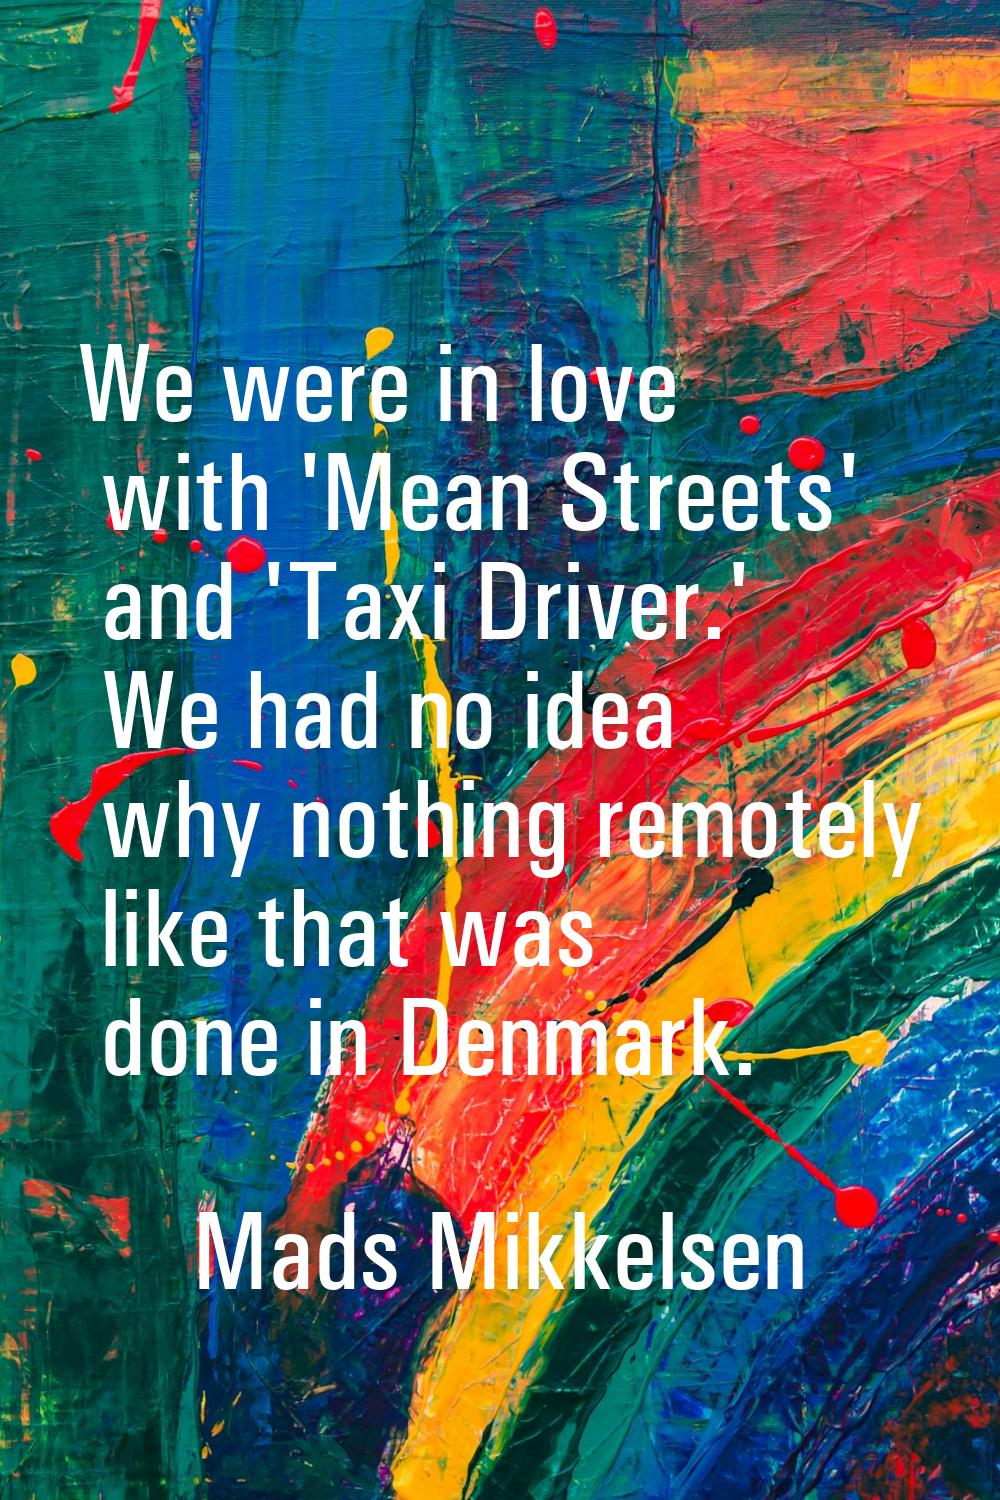 We were in love with 'Mean Streets' and 'Taxi Driver.' We had no idea why nothing remotely like tha